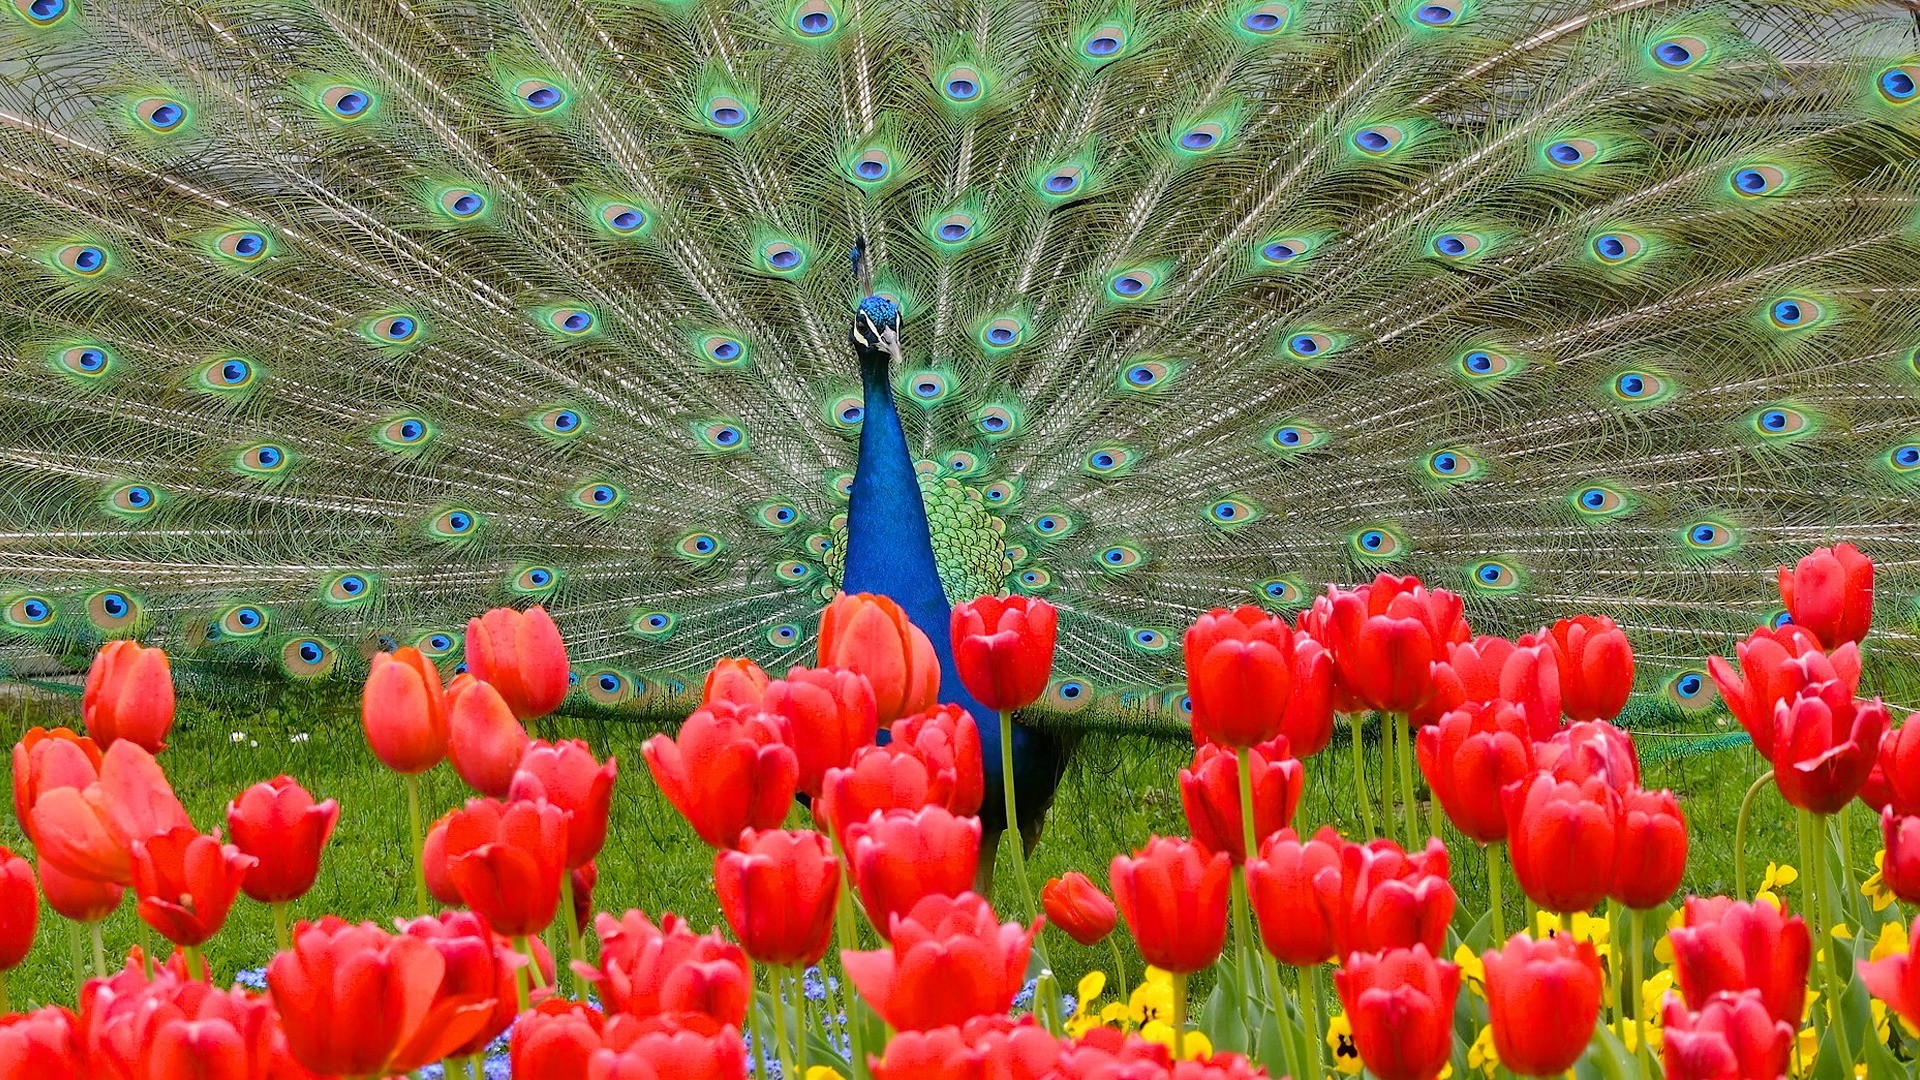 General 1920x1080 nature animals peacocks feathers flowers red flowers tulips grass birds